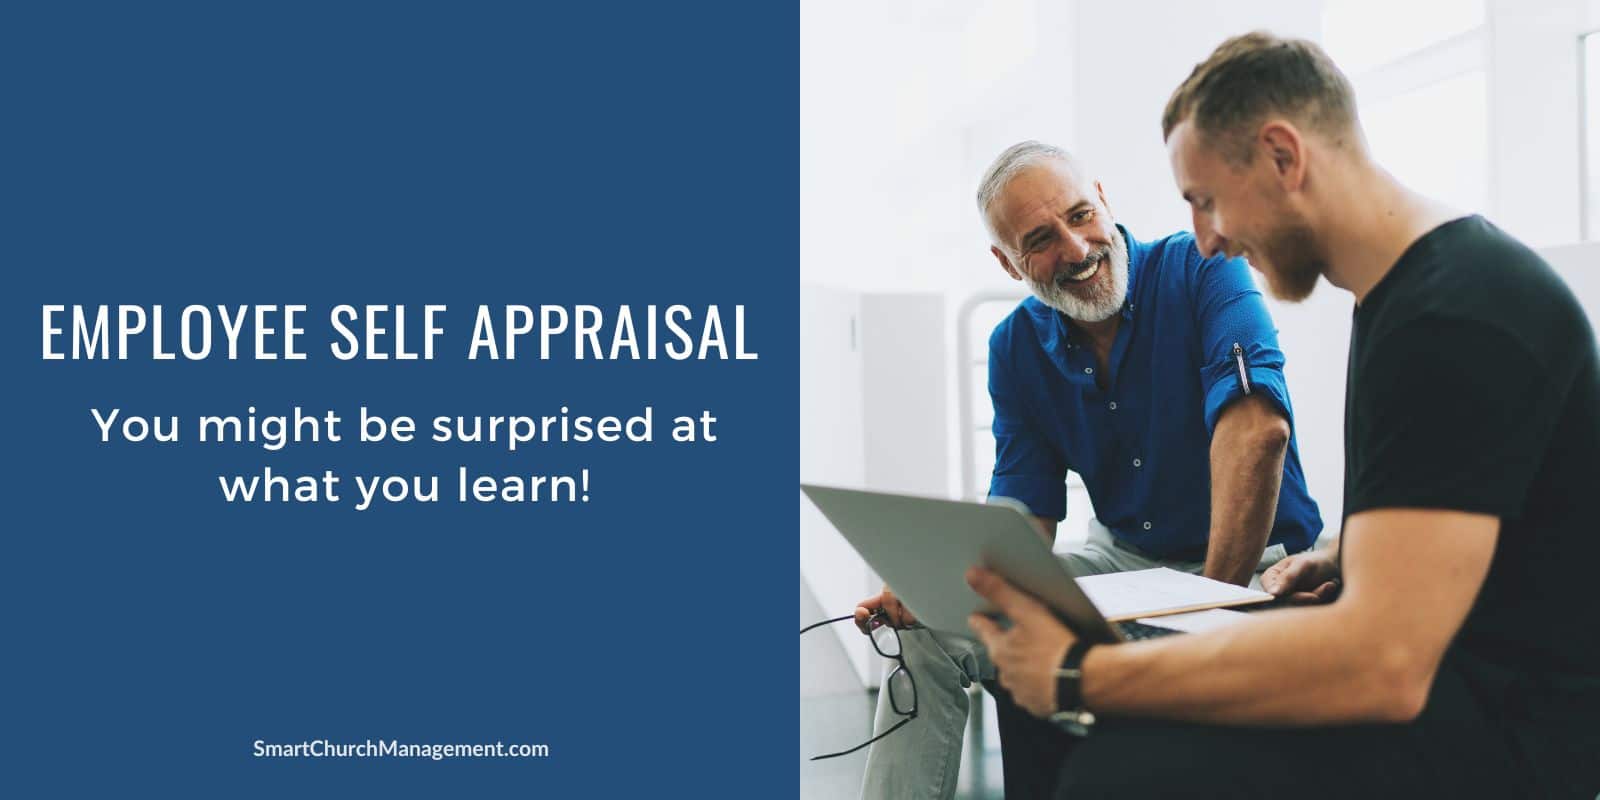 why is an employee self appraisal important